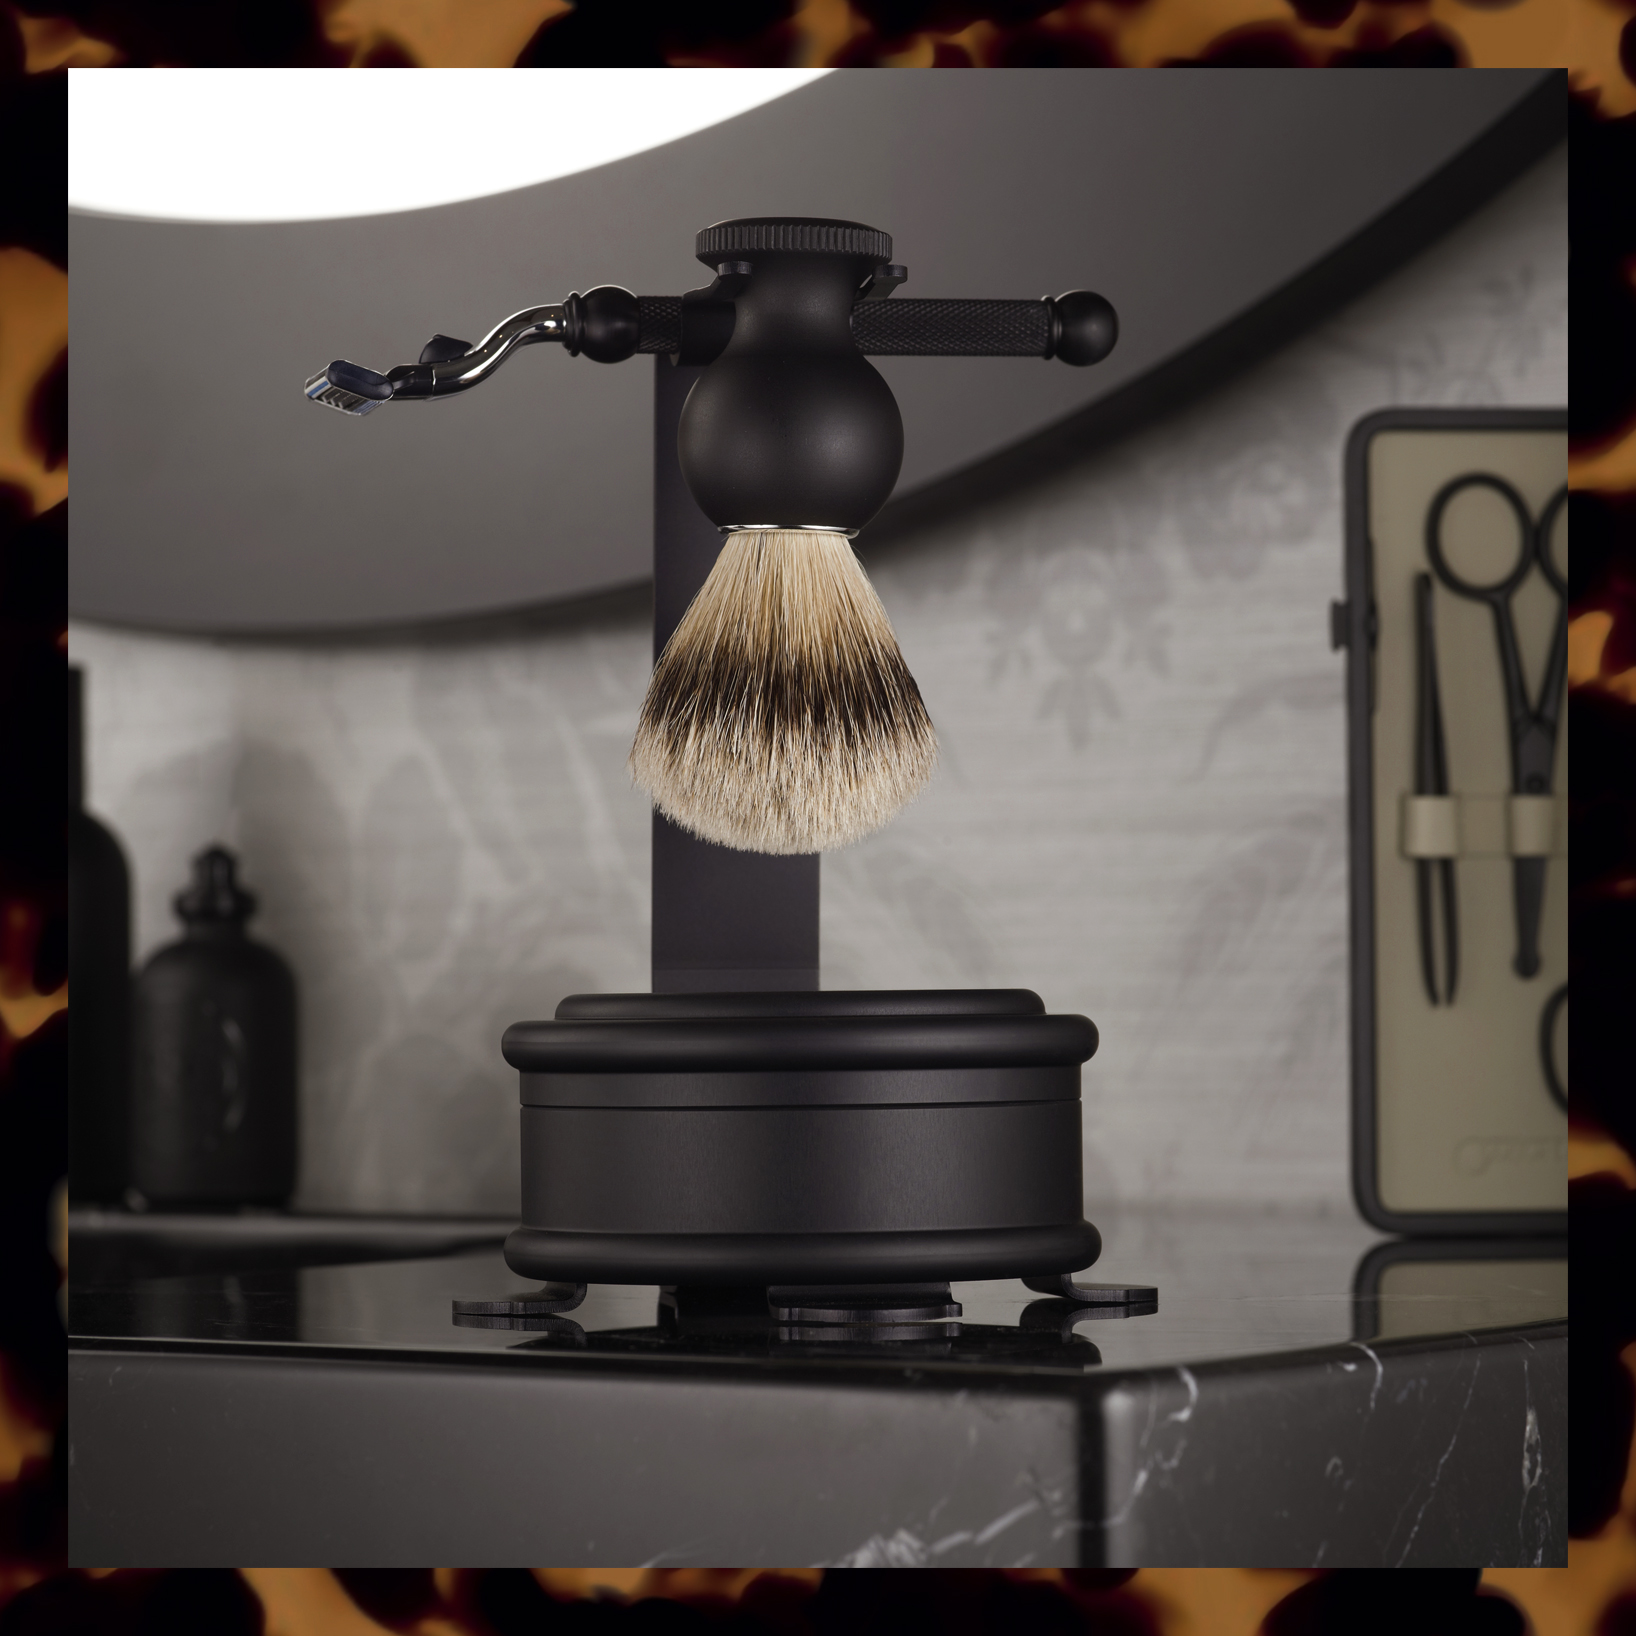 All Black Shaving Kit with stand, traditional shaving brush, soap and razor